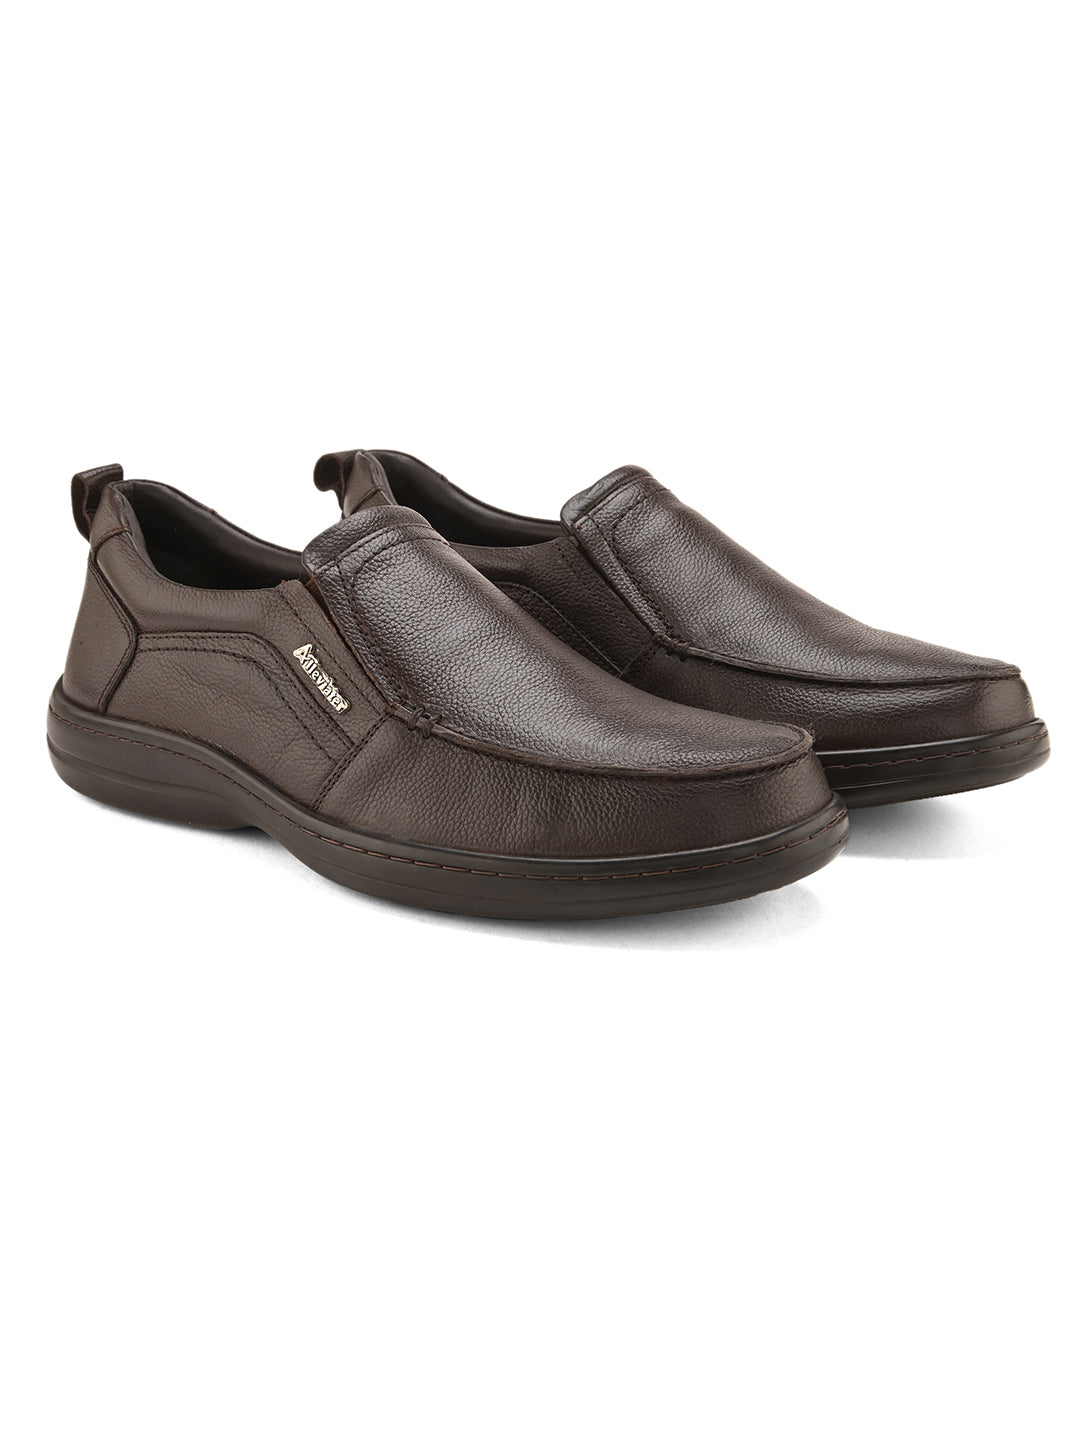 LitLaces - Premium Sheep Skin Synthetic Leather Shoe India